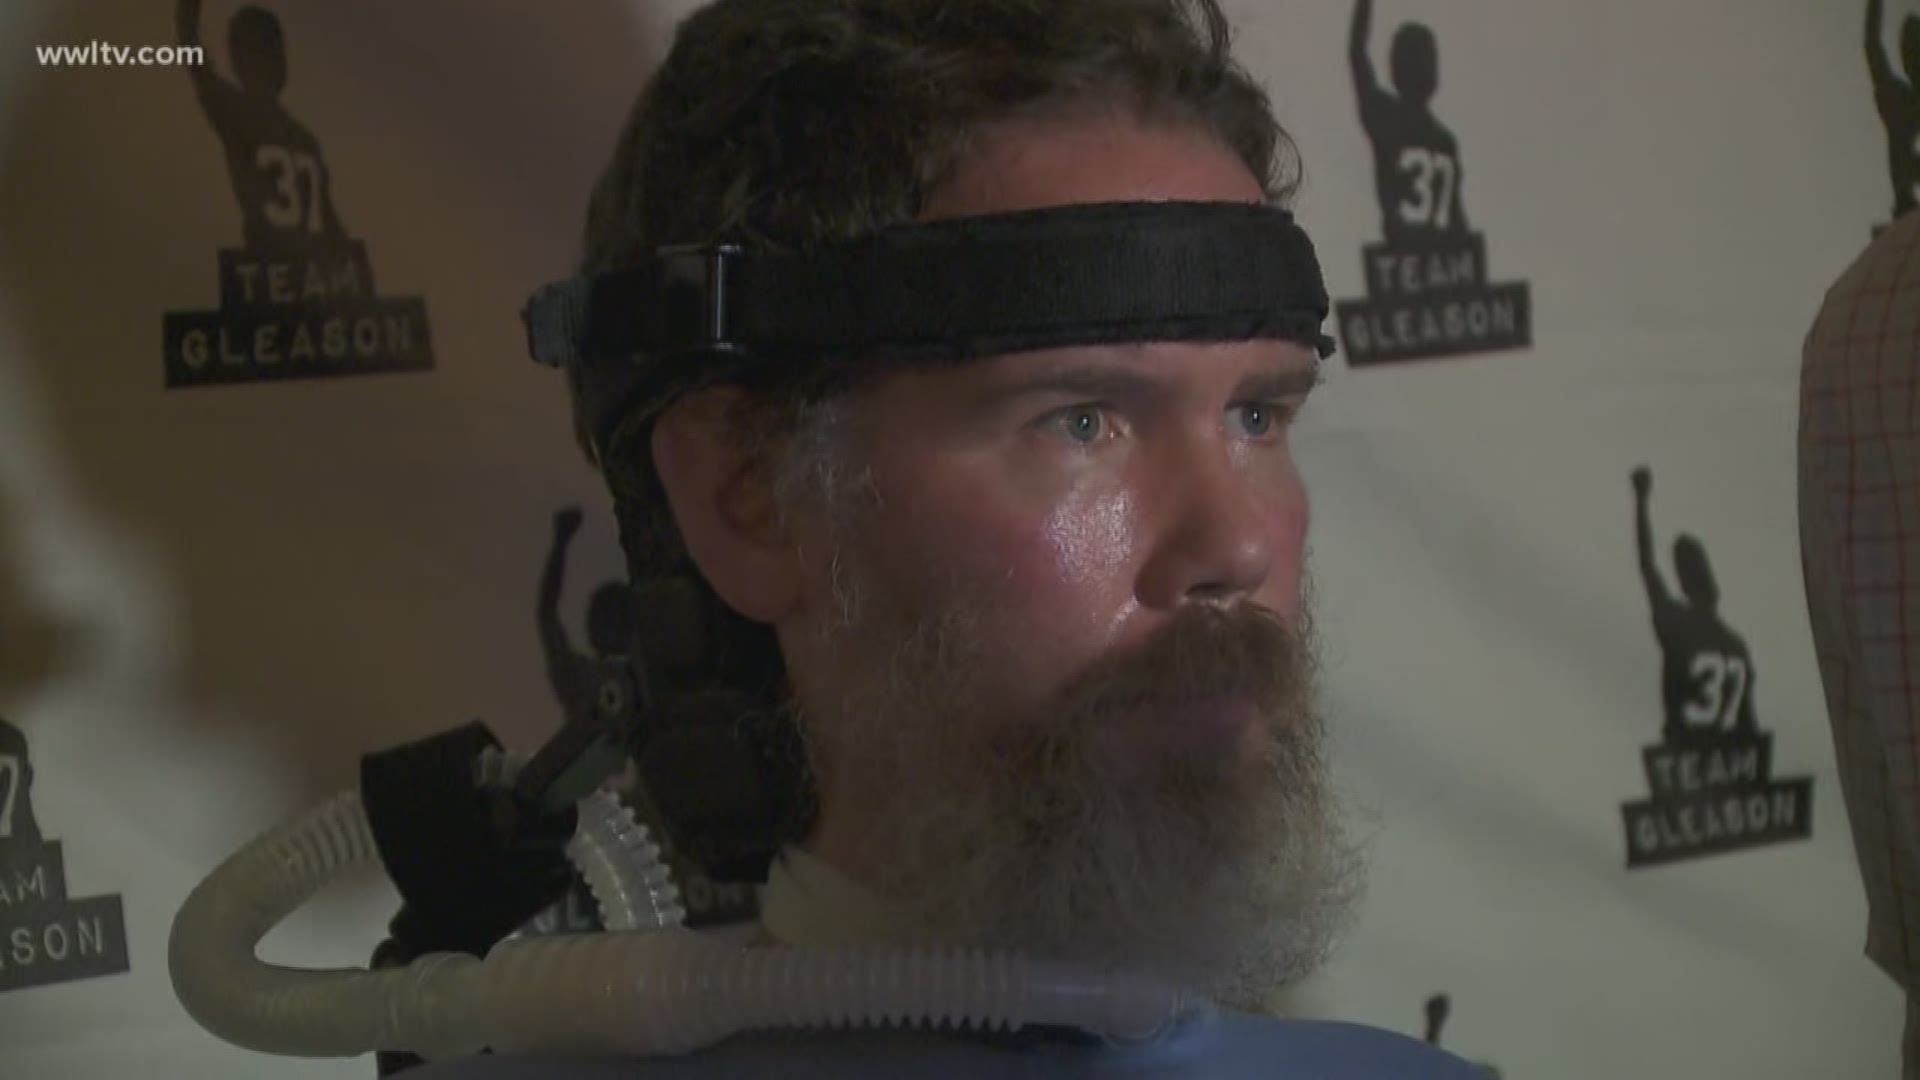 Steve Gleason celebrates another milestone in a life filled with inspiring moments.